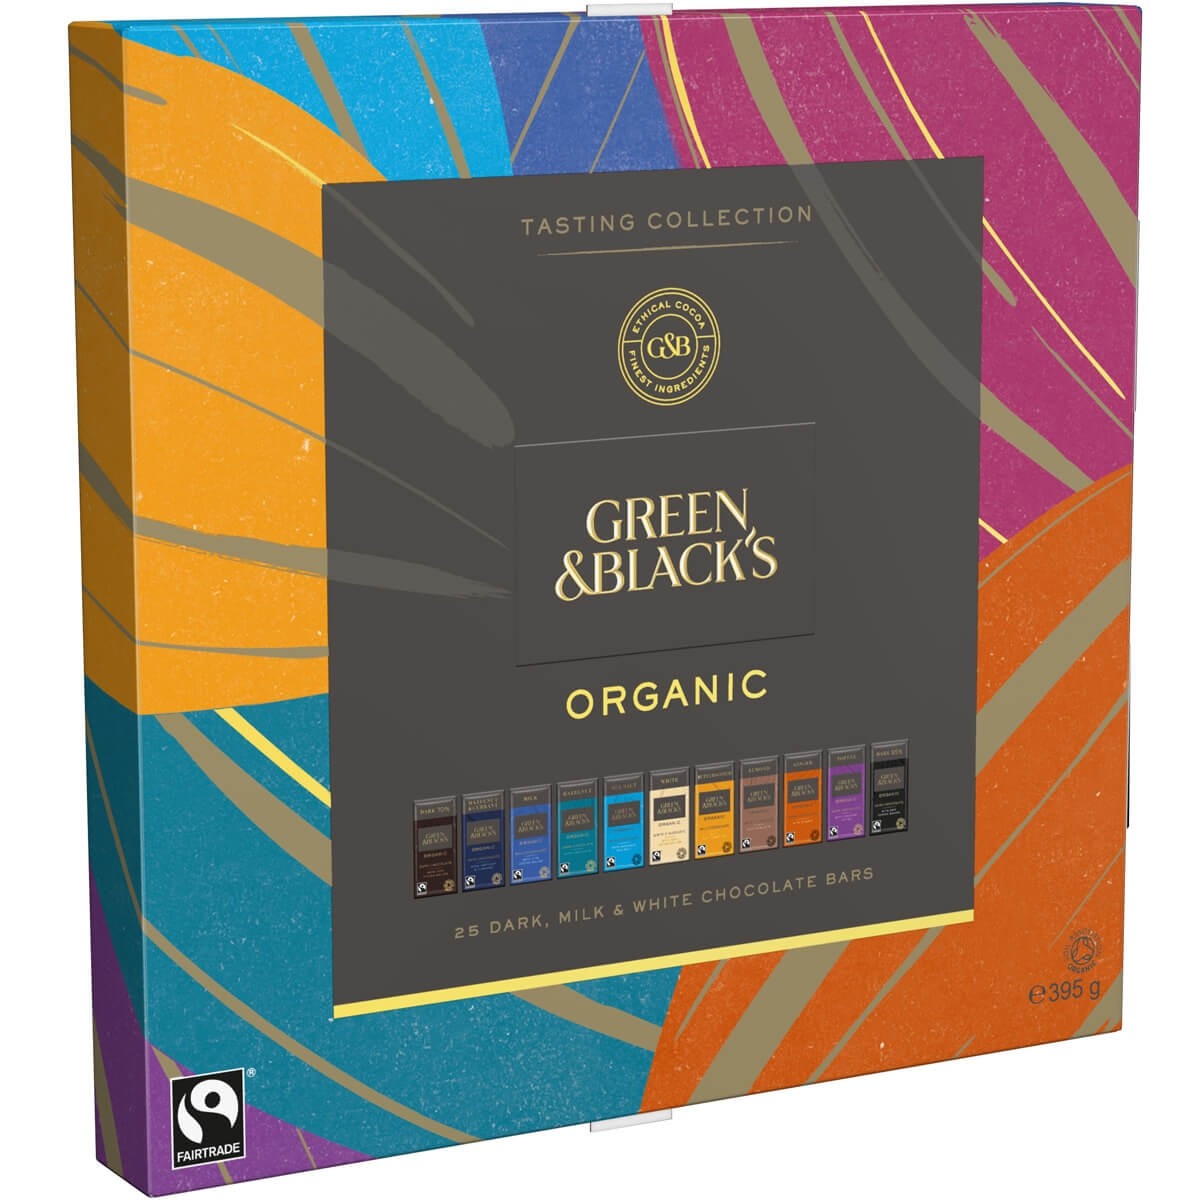 Win a Green & Black's Organic Tasting Collection Box!